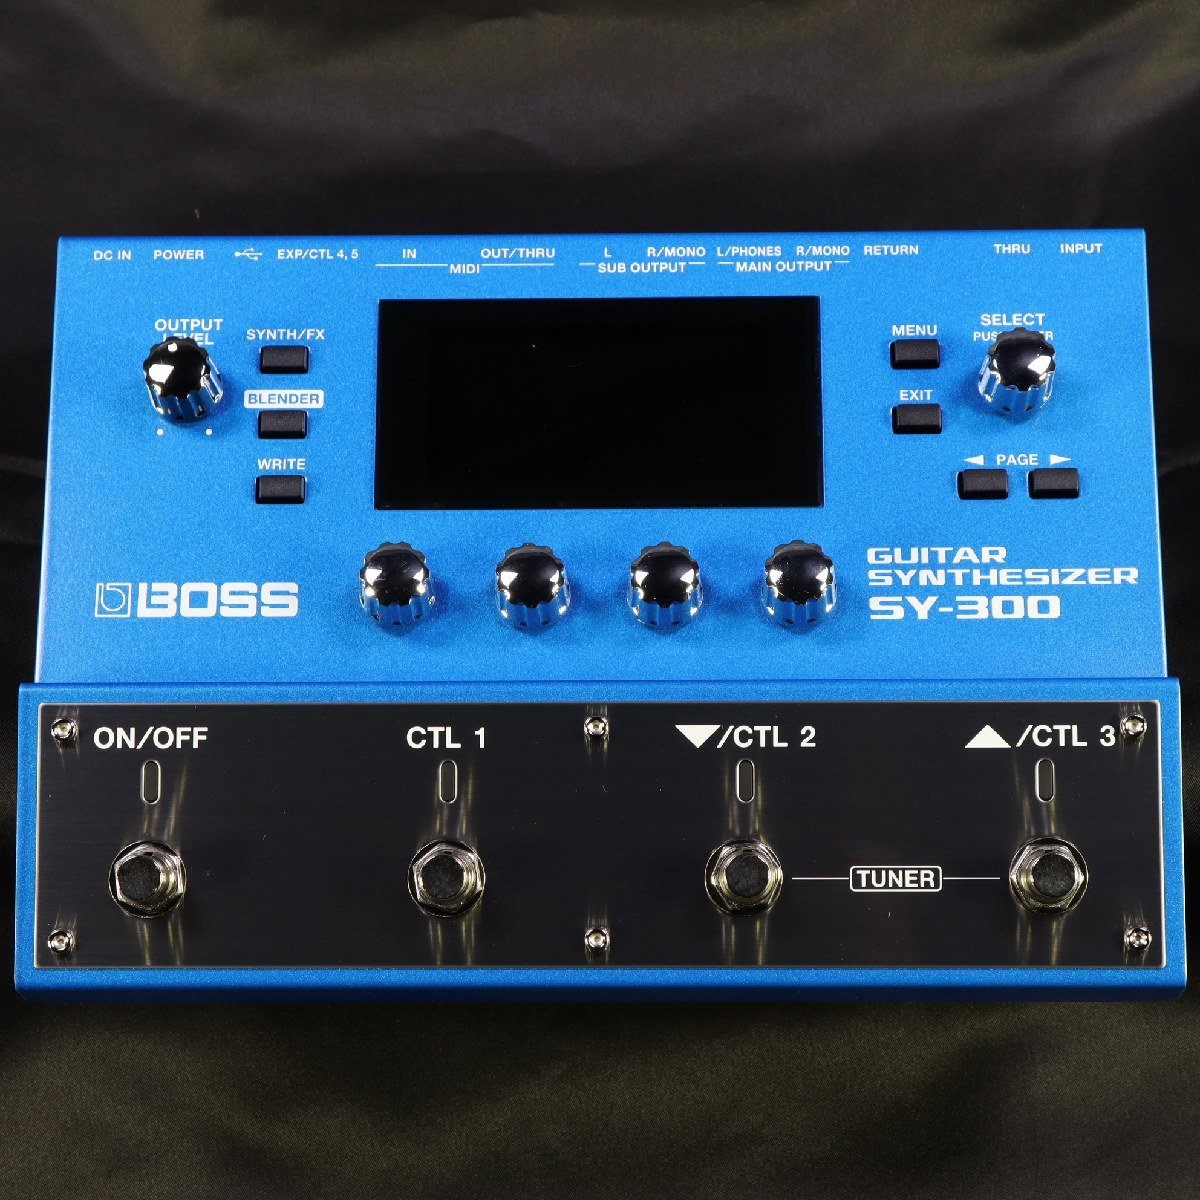 BOSS SY-300 Guitar Synthesizer SY300 ギターシンセサイザー ボス